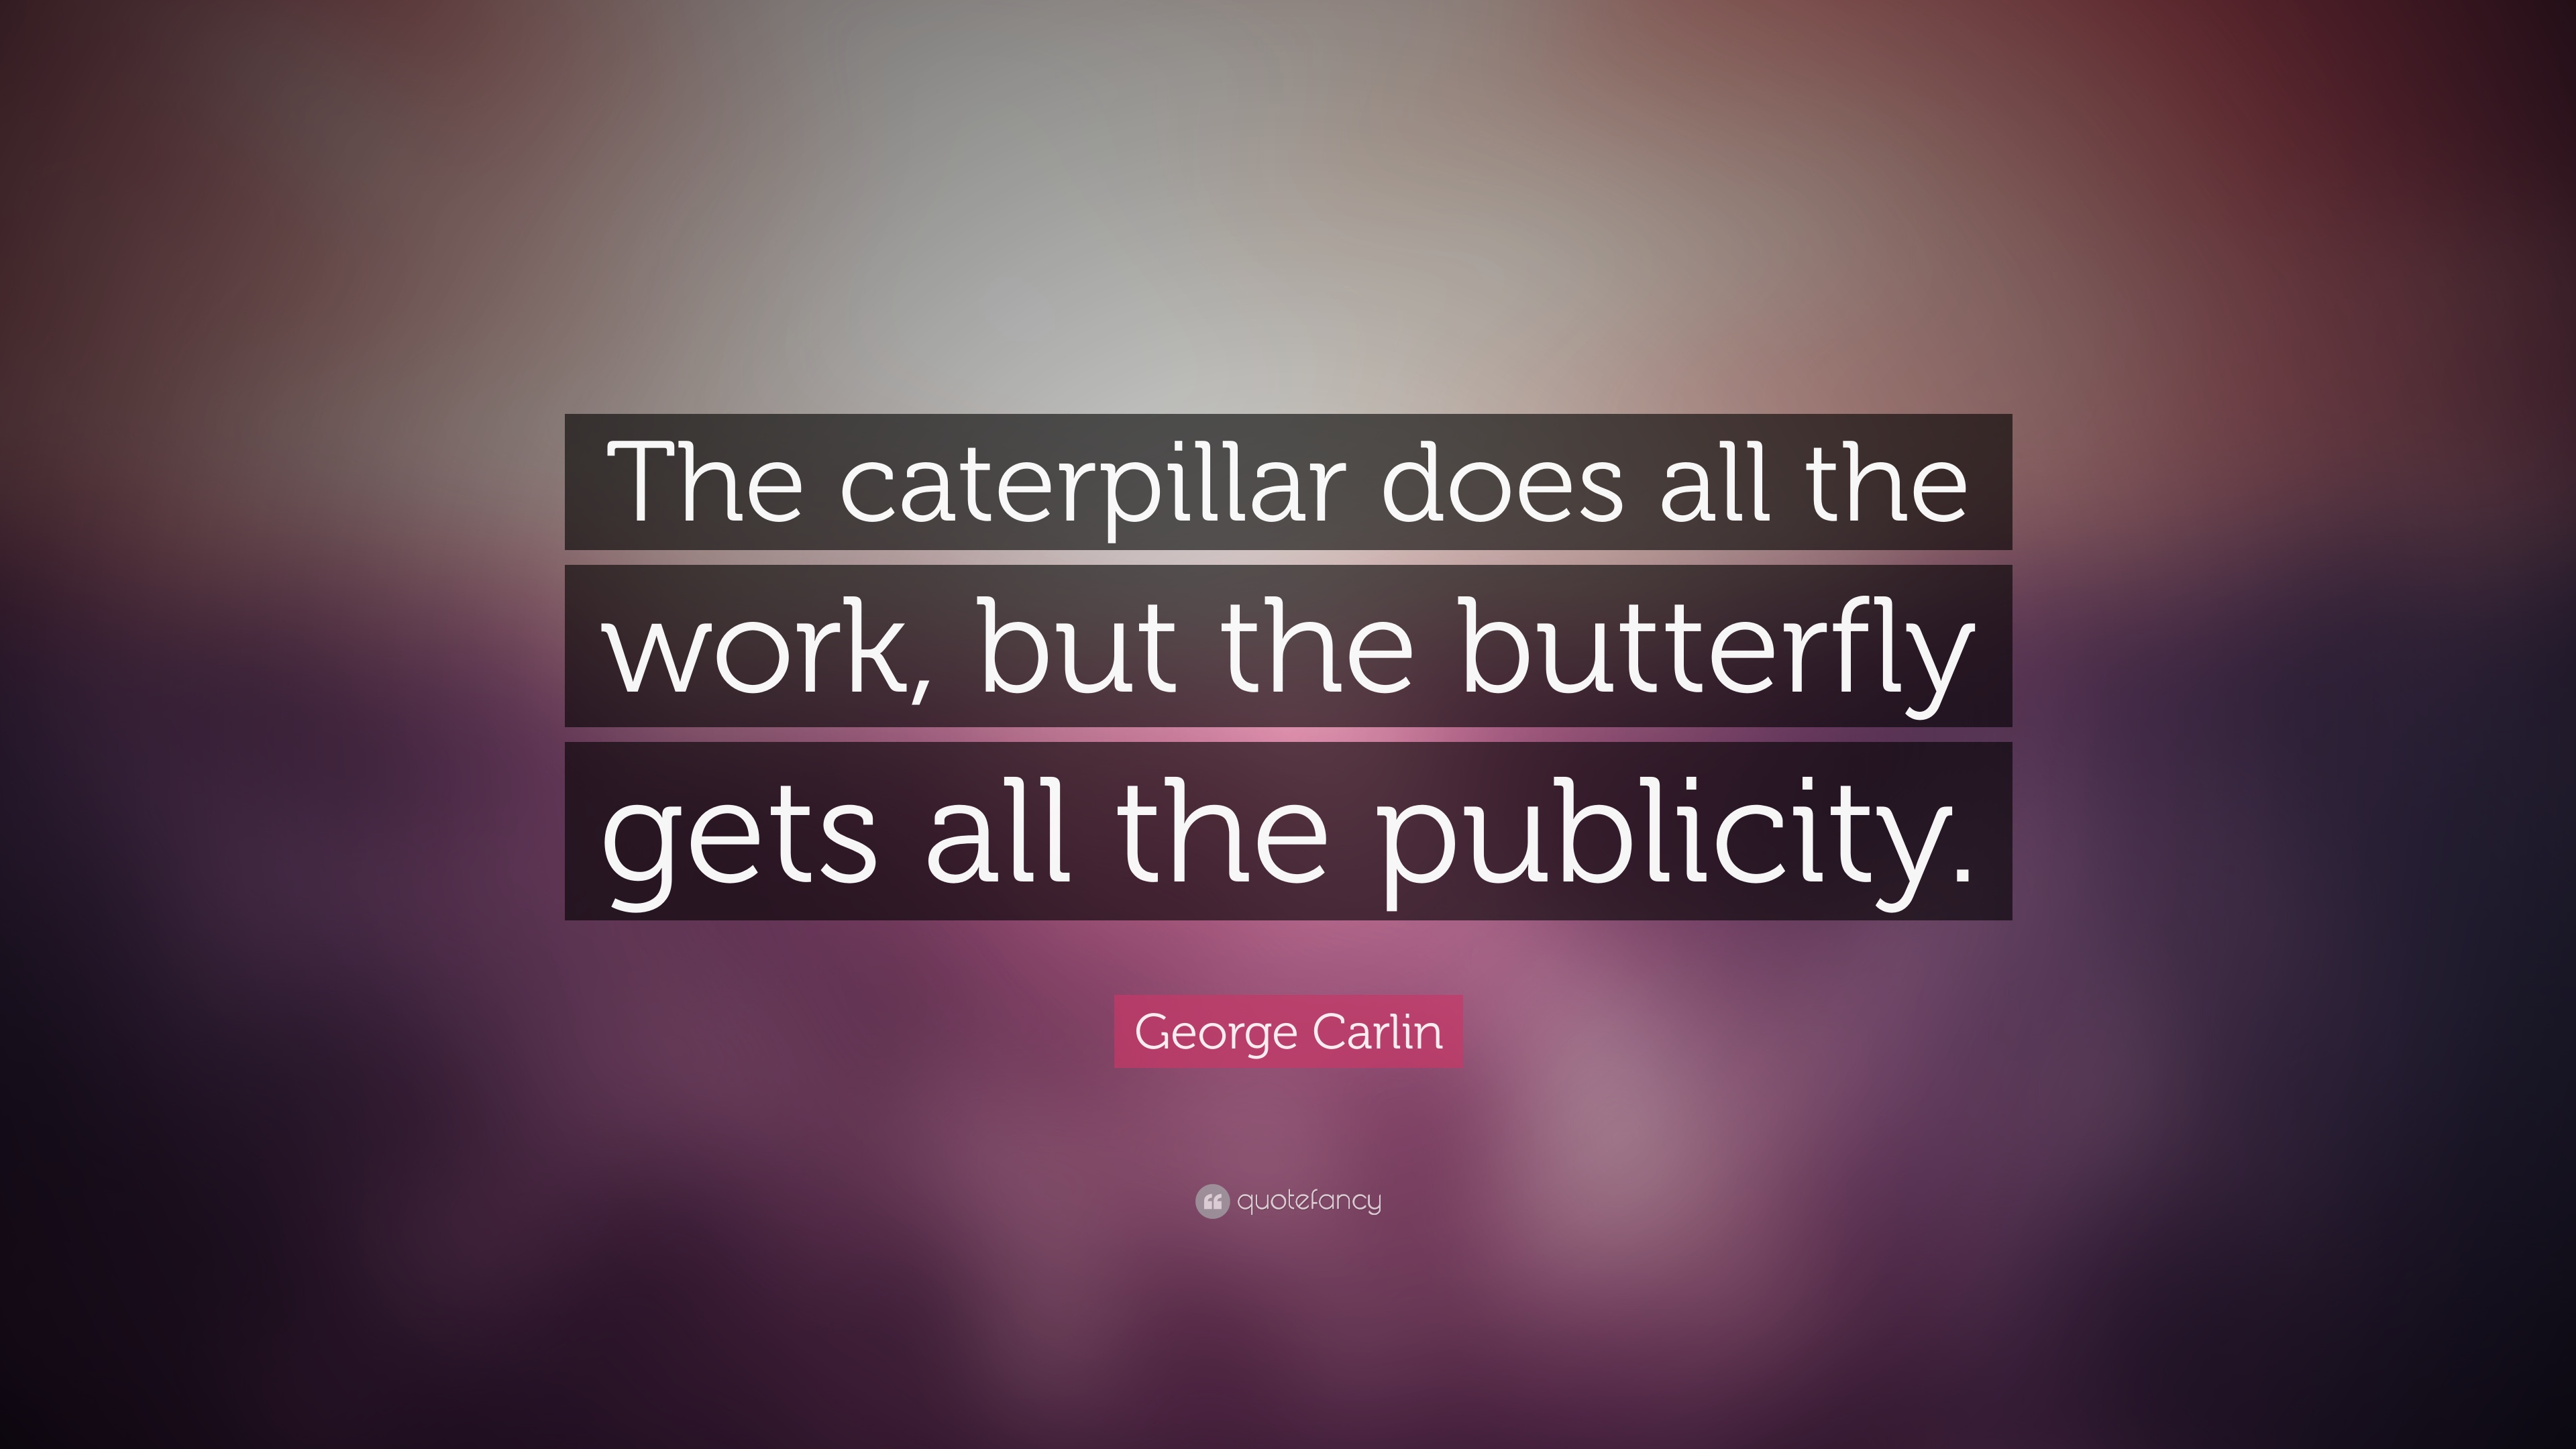 George Carlin Quote: “The caterpillar does all the work, but the ...